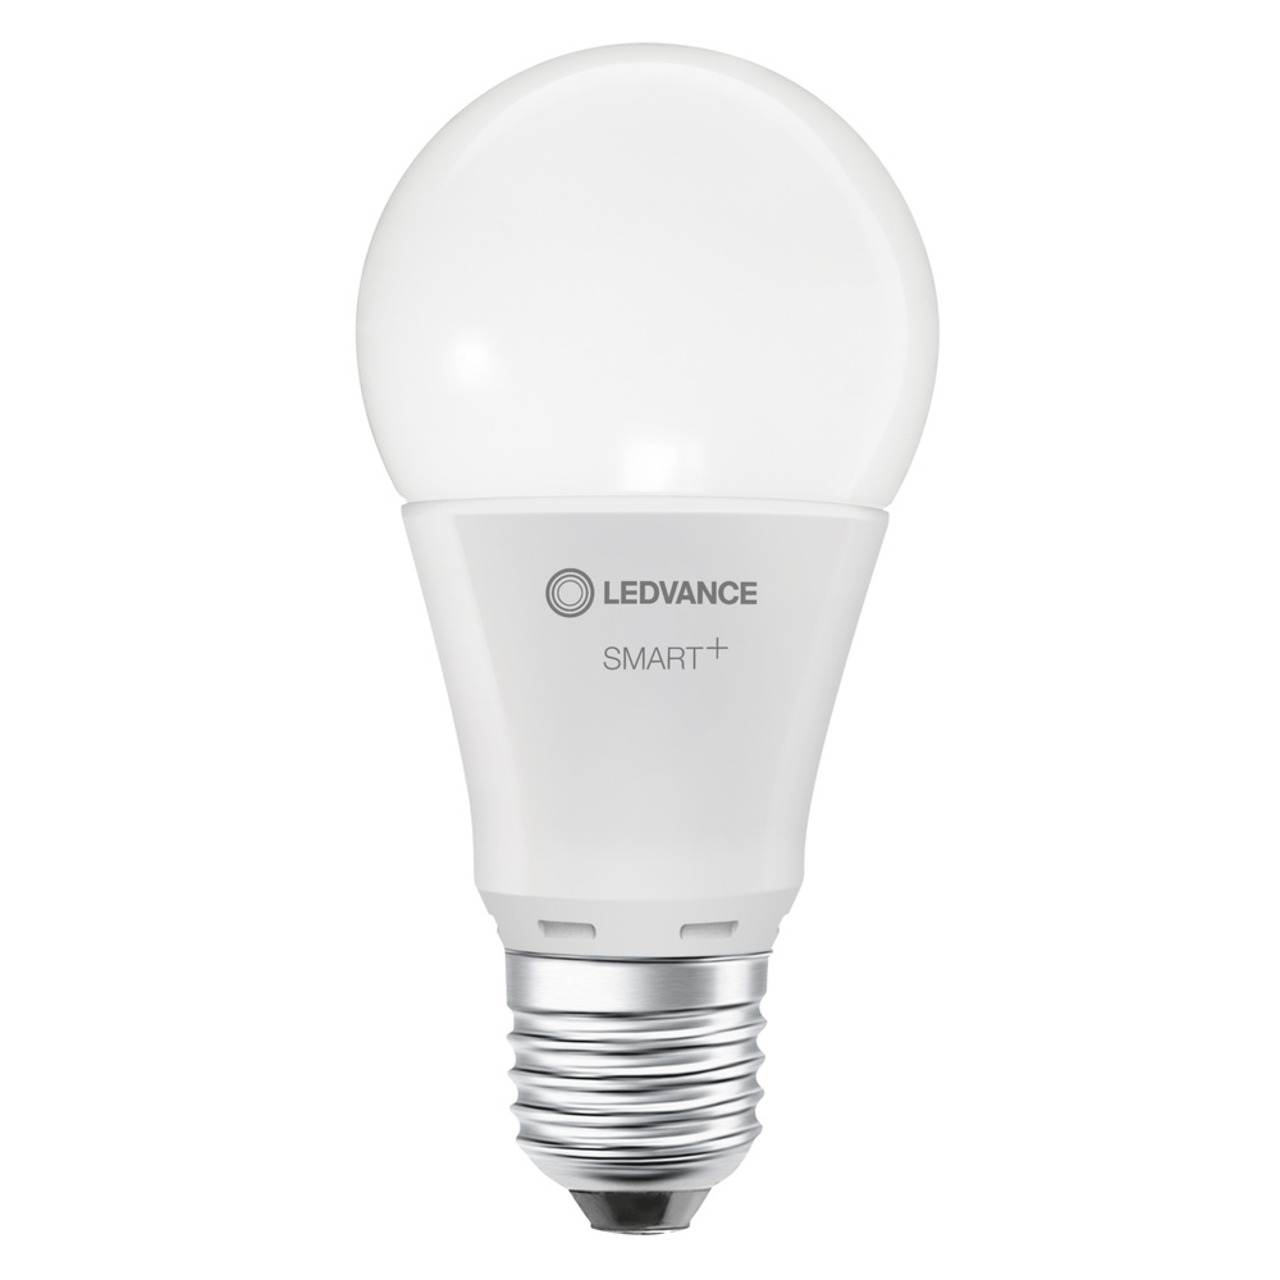 LEDVANCE SMART+ WiFi 9-5-W-LED-Lampe A75- E27- 1055 lm- Tunable White- dimmbar- Alexa- App unter Beleuchtung